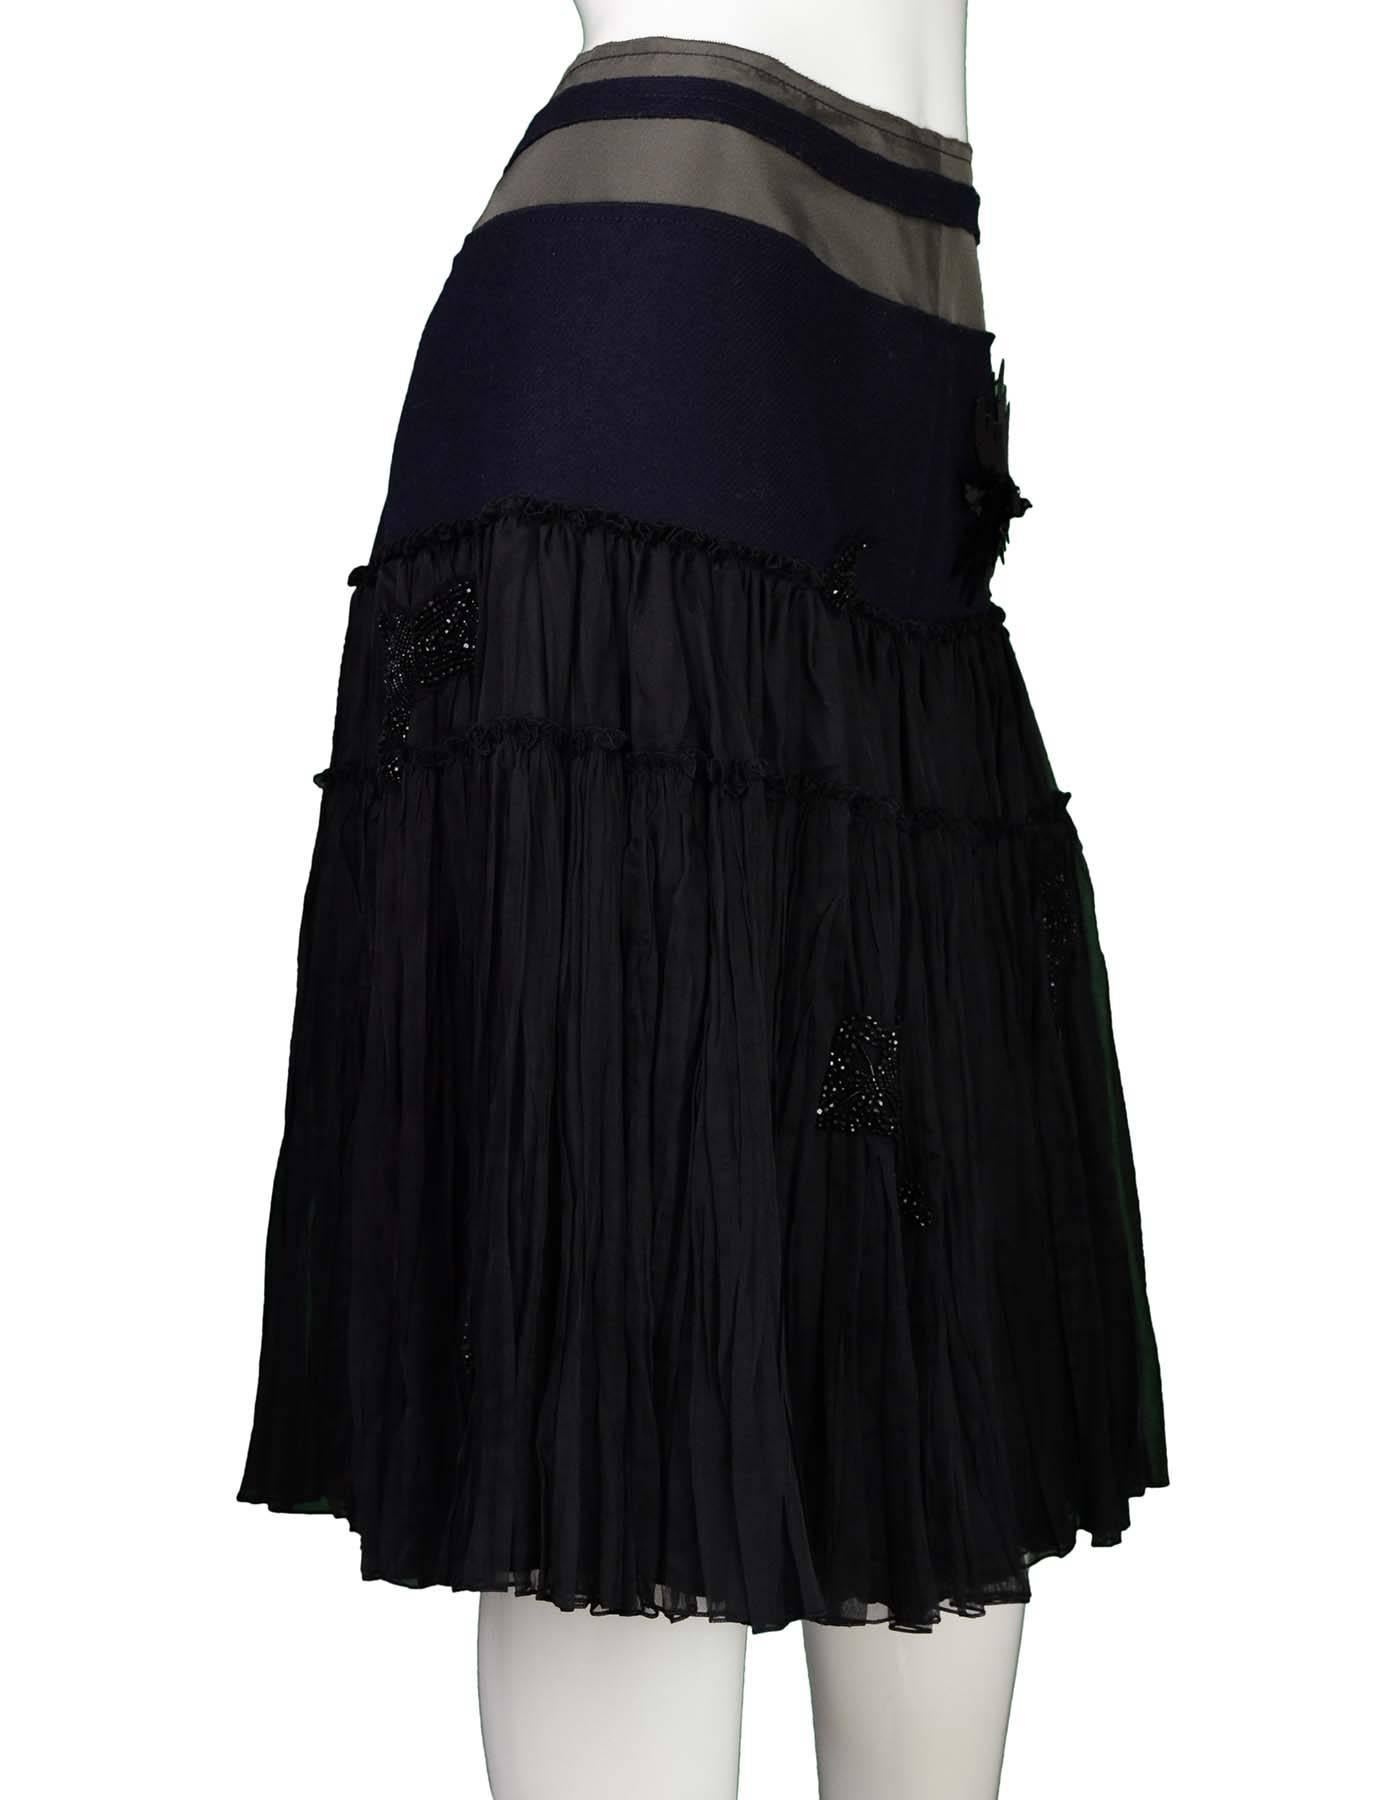 Prada Black and Navy Beaded Skirt Sz 44
Features beading throughout skirt

Made In: Italy
Color: Black, navy, grey
Composition: 100% Silk, 100% Wool
Lining: Black textile
Closure/Opening: Hidden side zip closure
Overall Condition: Very good